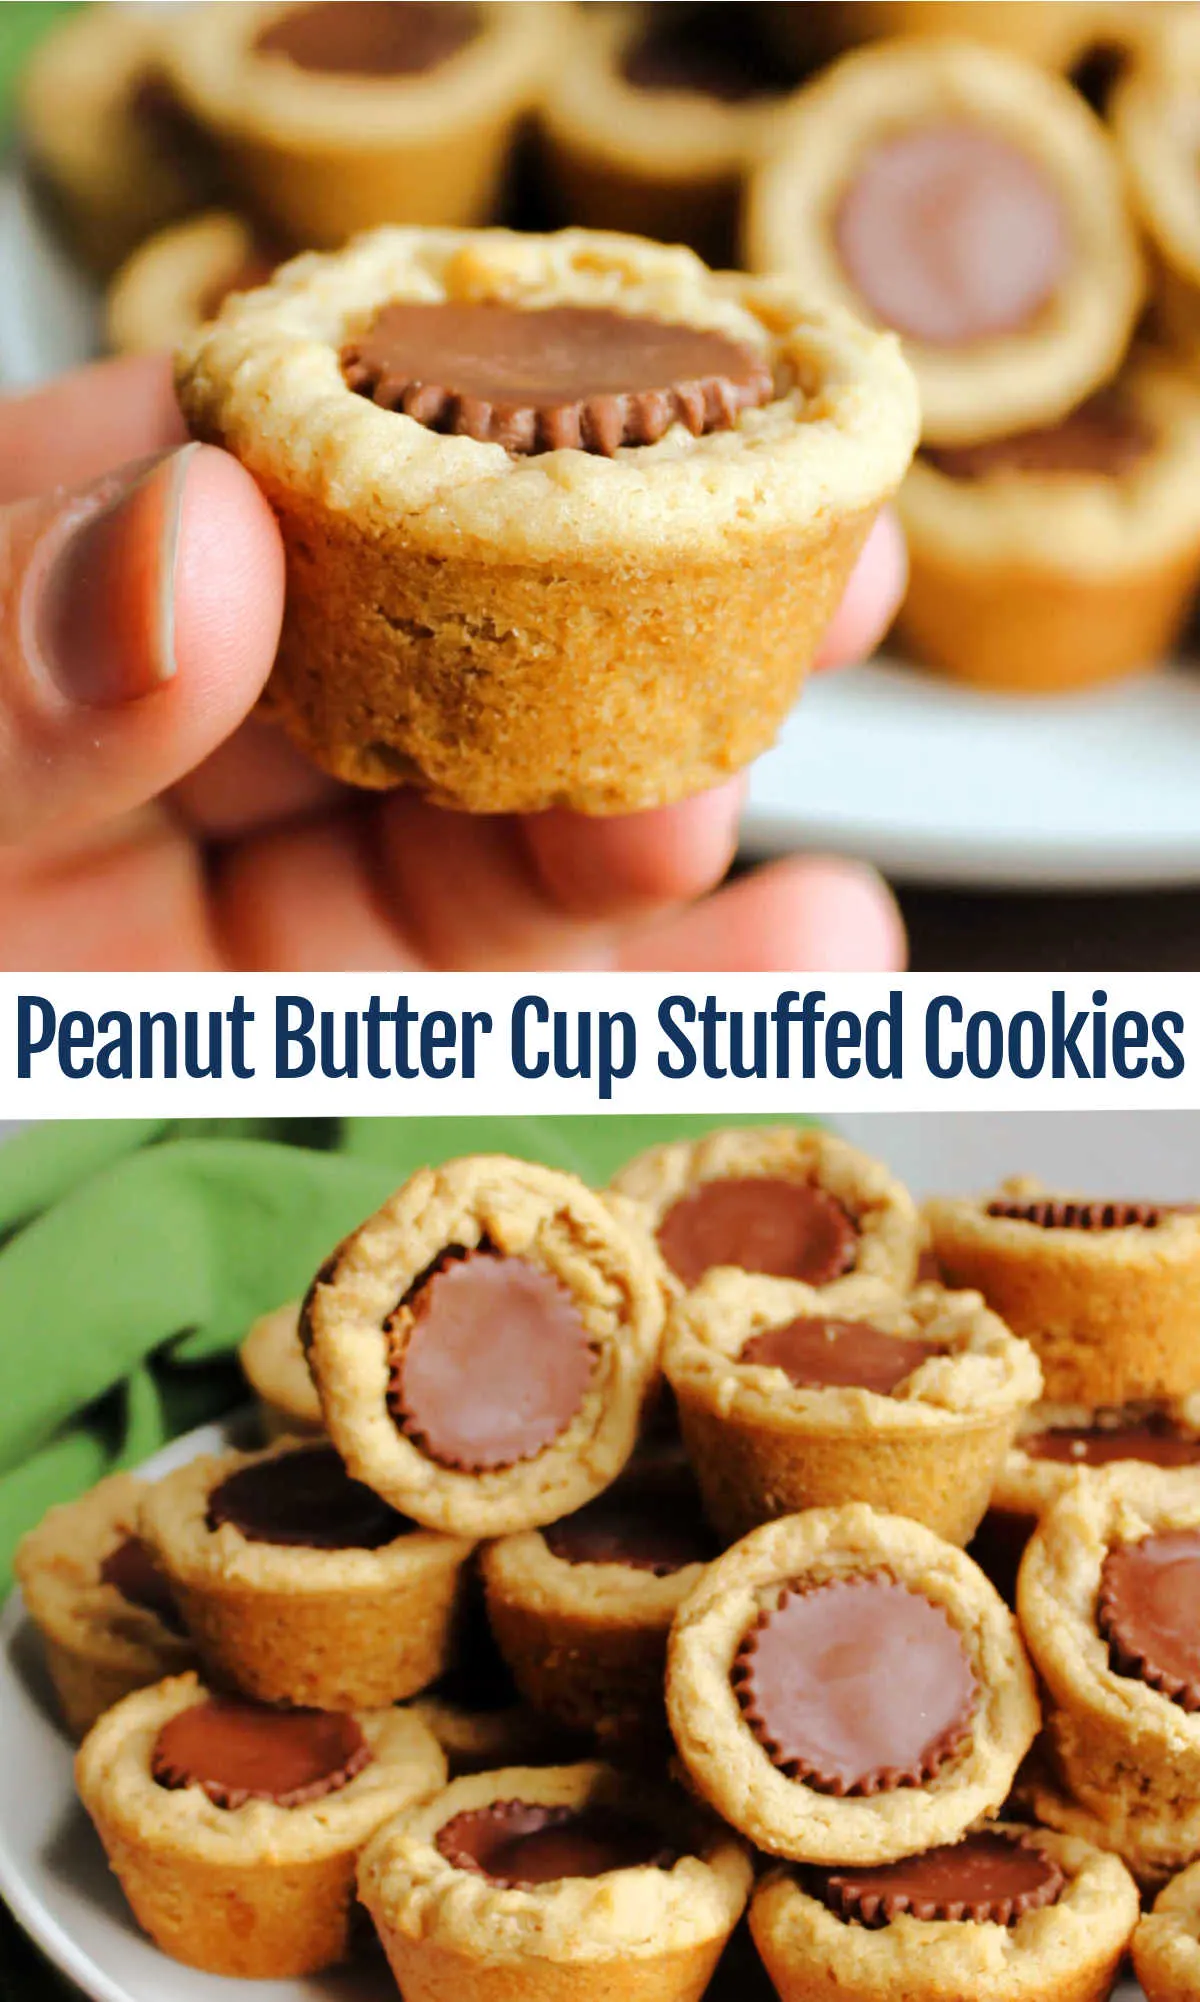 Chewy peanut butter cookies baked in a mini muffin tin and stuffed with a mini peanut butter cup are a perfect treat. They are right at home for any occasion from an after school snack to a Christmas cookie tray.